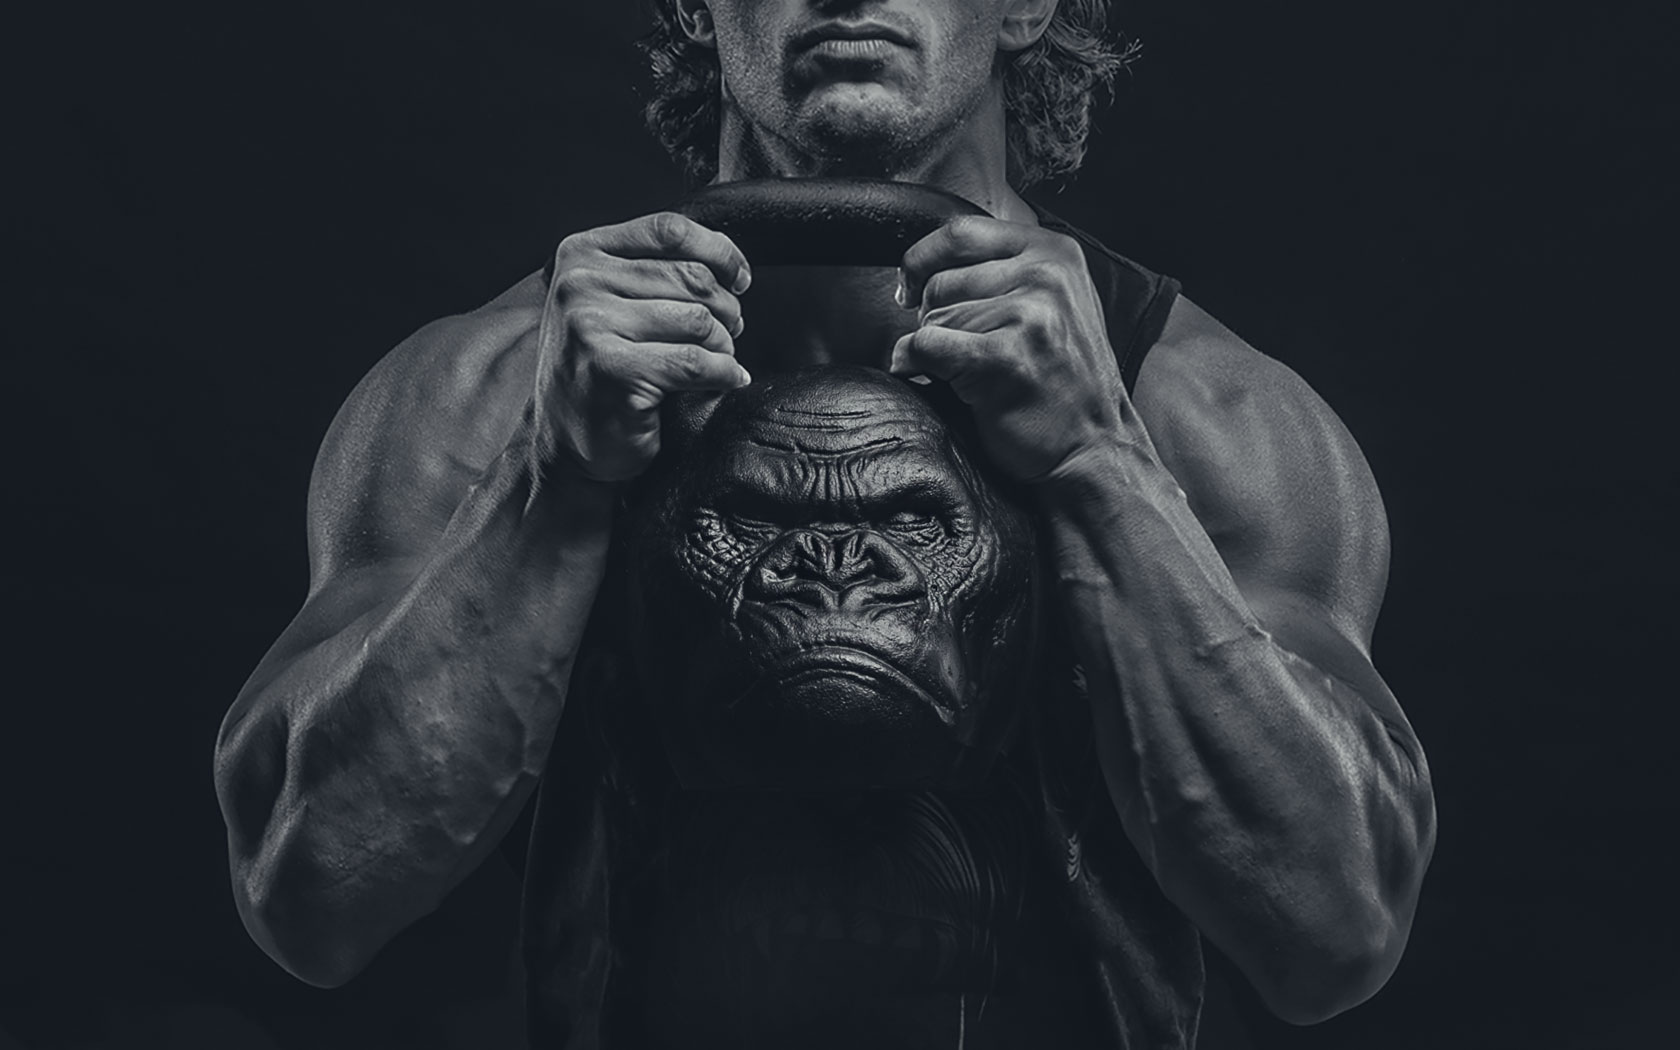 Getting Onnit The Kettle Bell Specialist